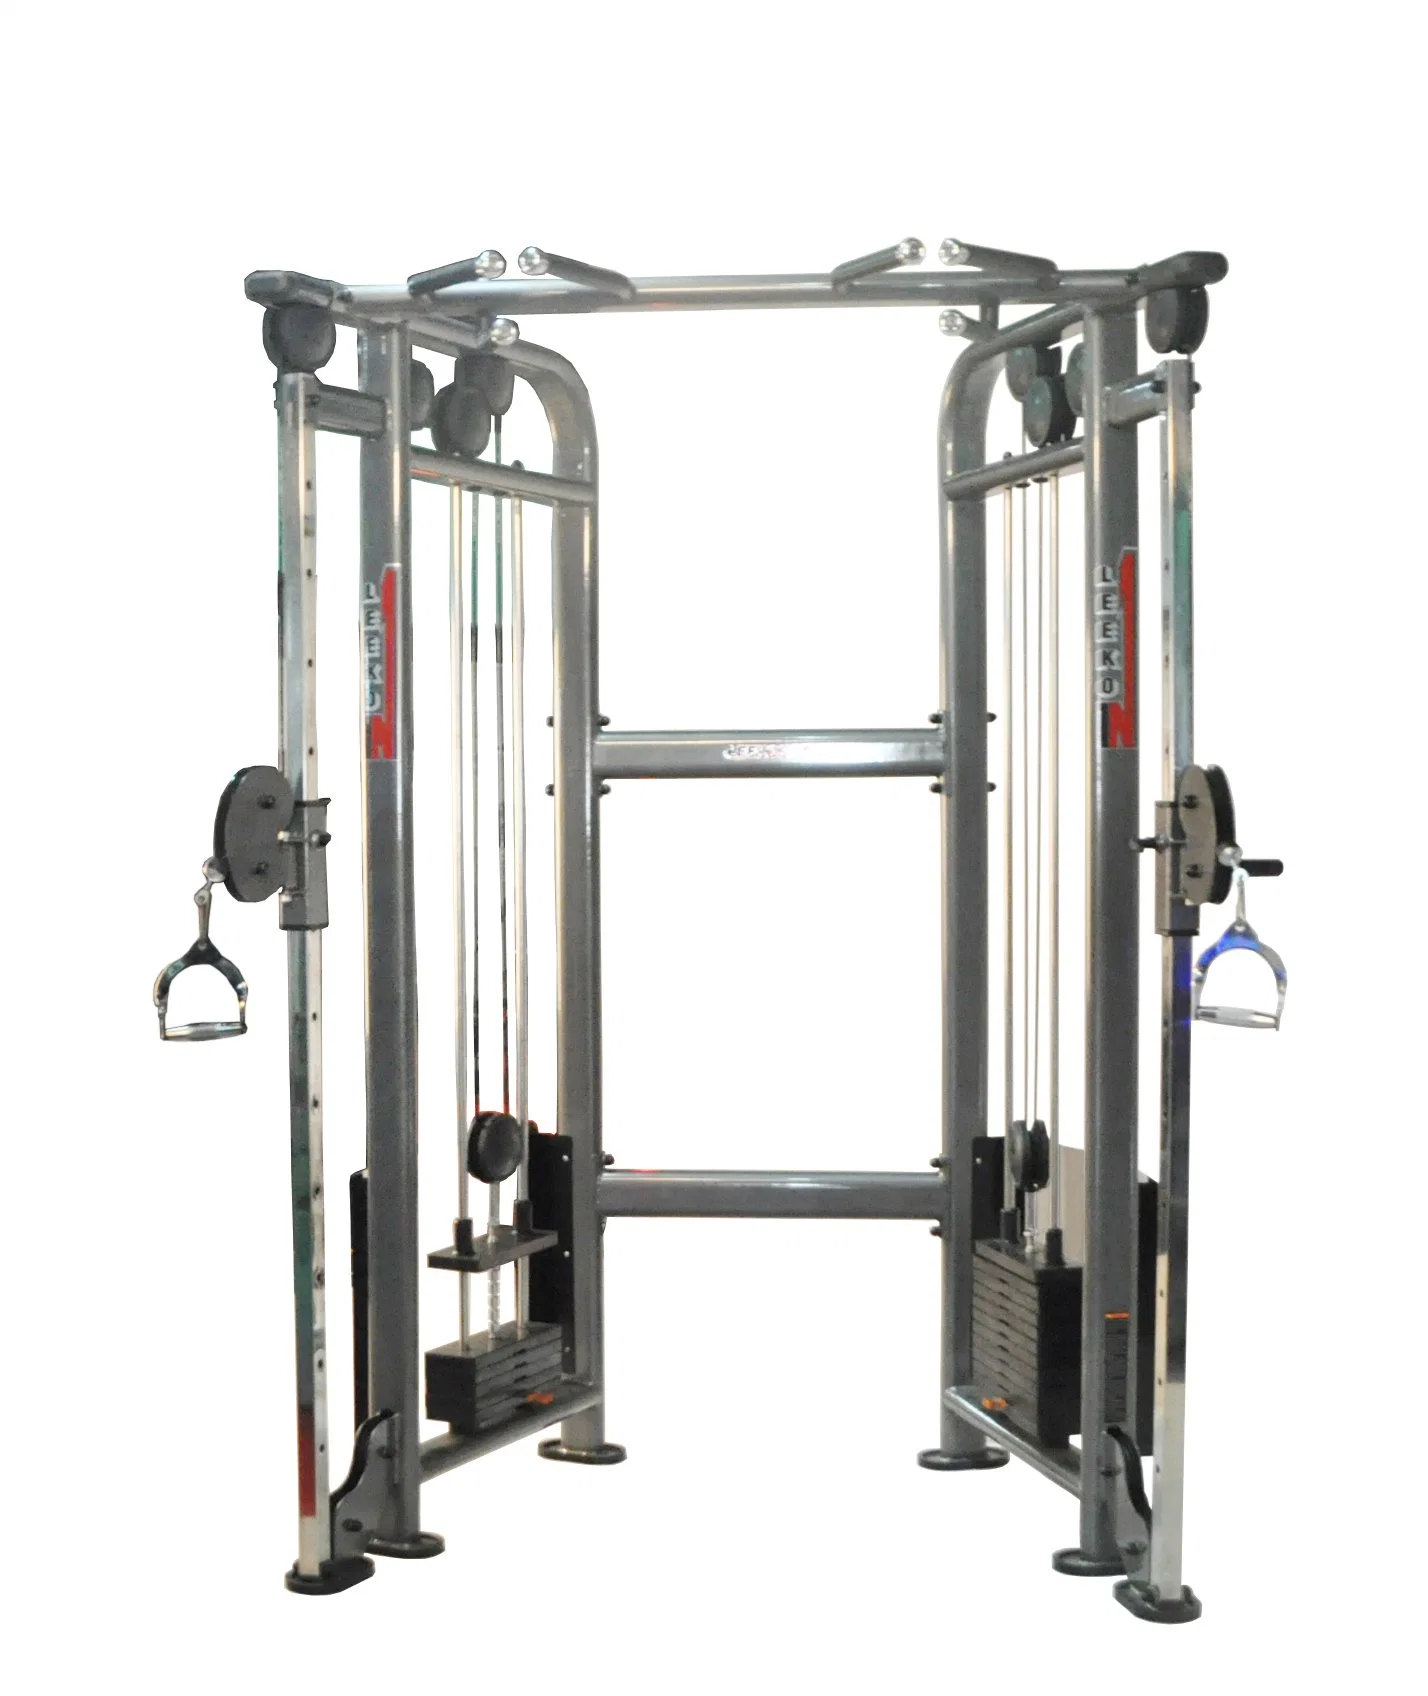 Leekon Commercial Use Dual Adjustable Pulley Gym Exercise Equipment